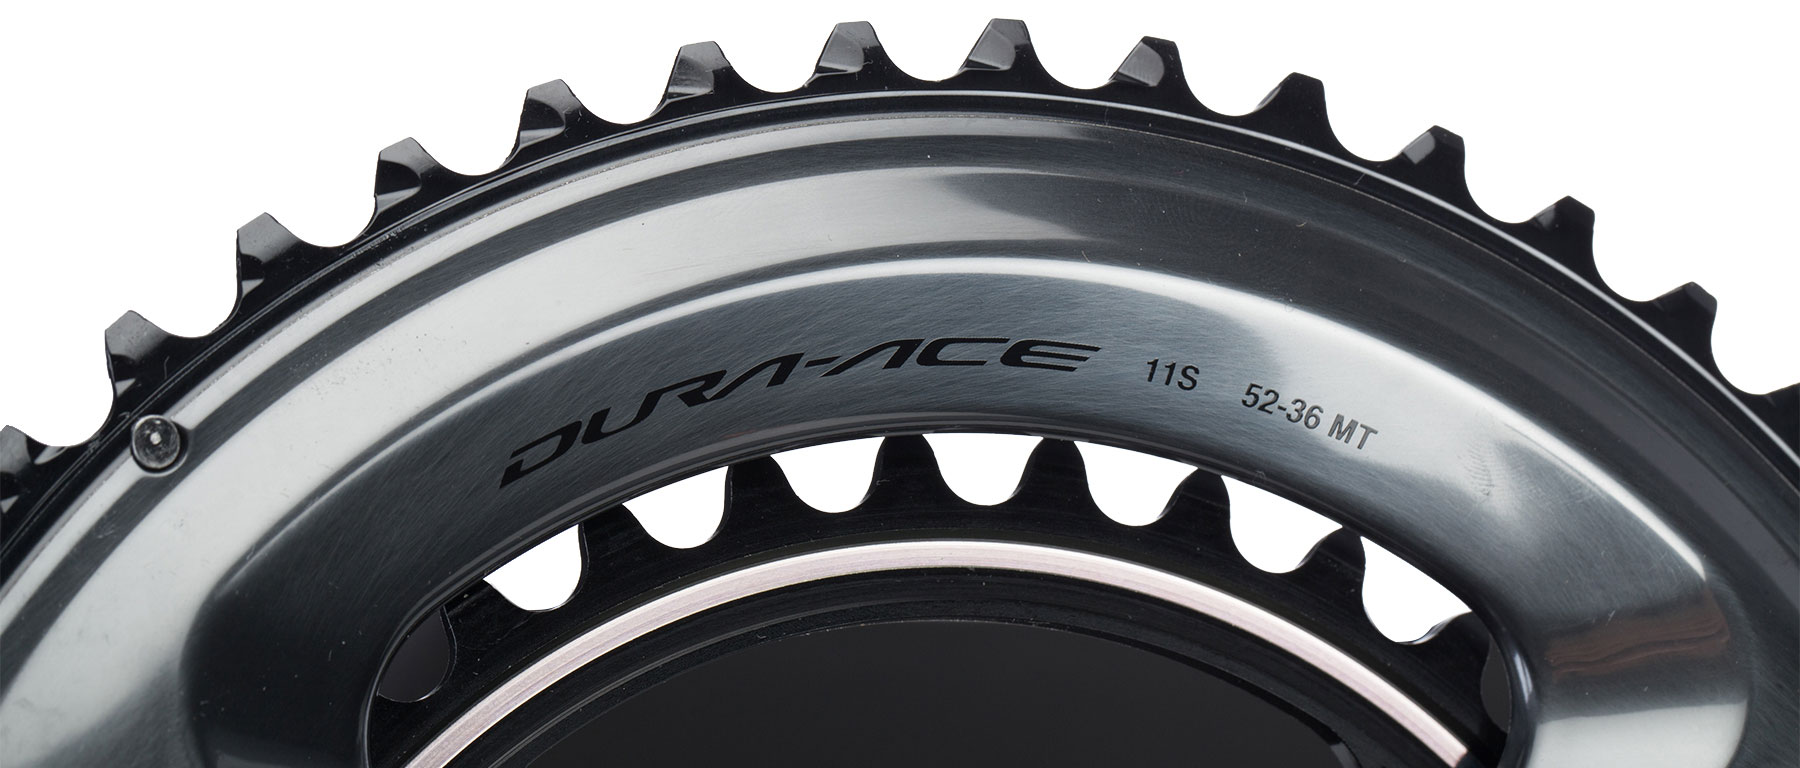 Stages Power LR Dura-Ace R9100 Meter